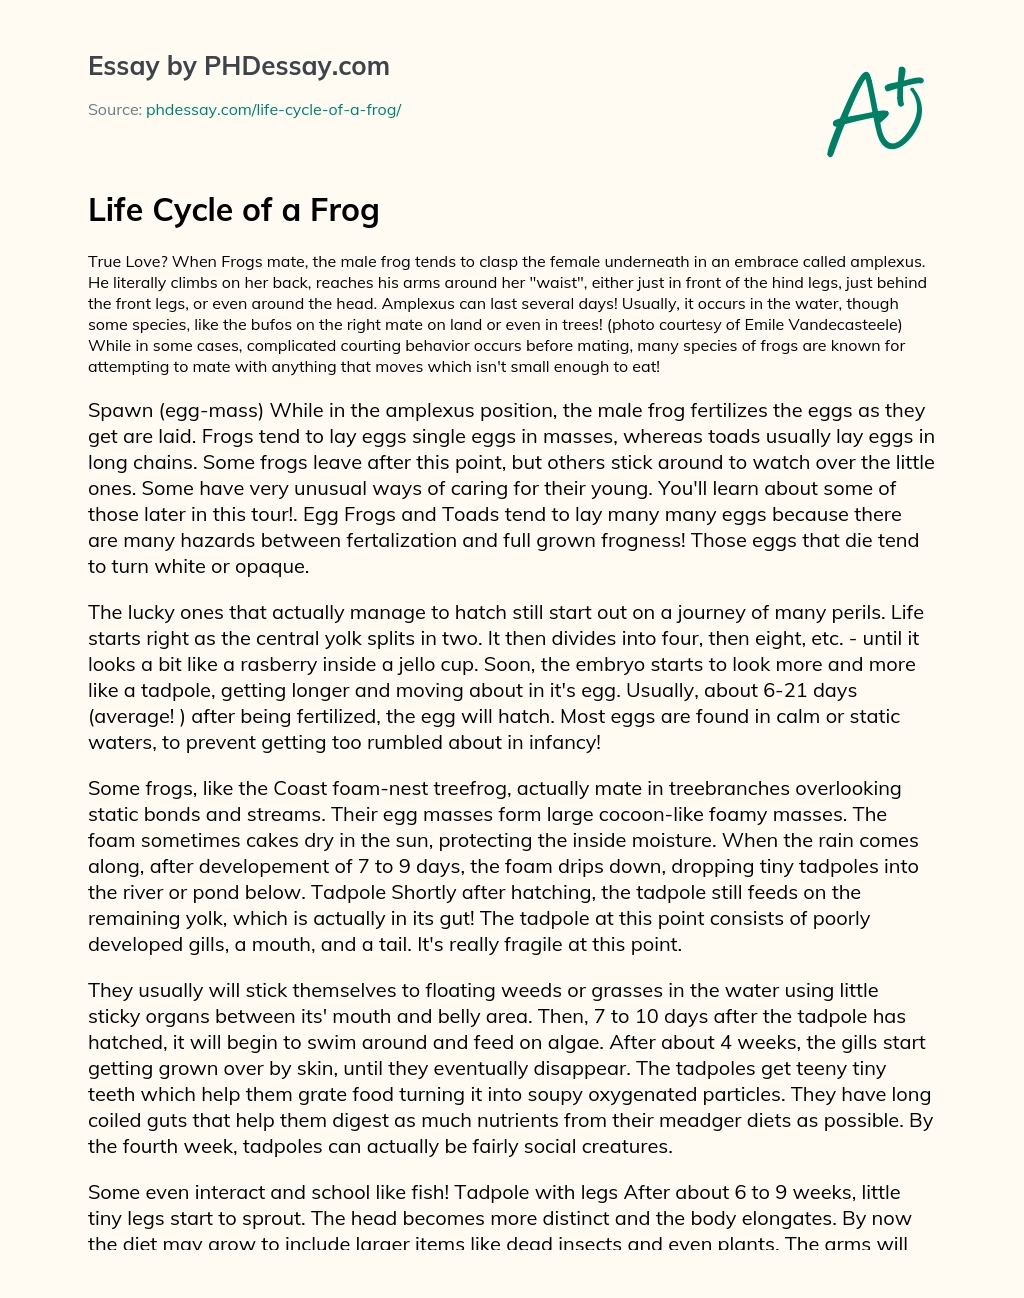 Life Cycle of a Frog essay